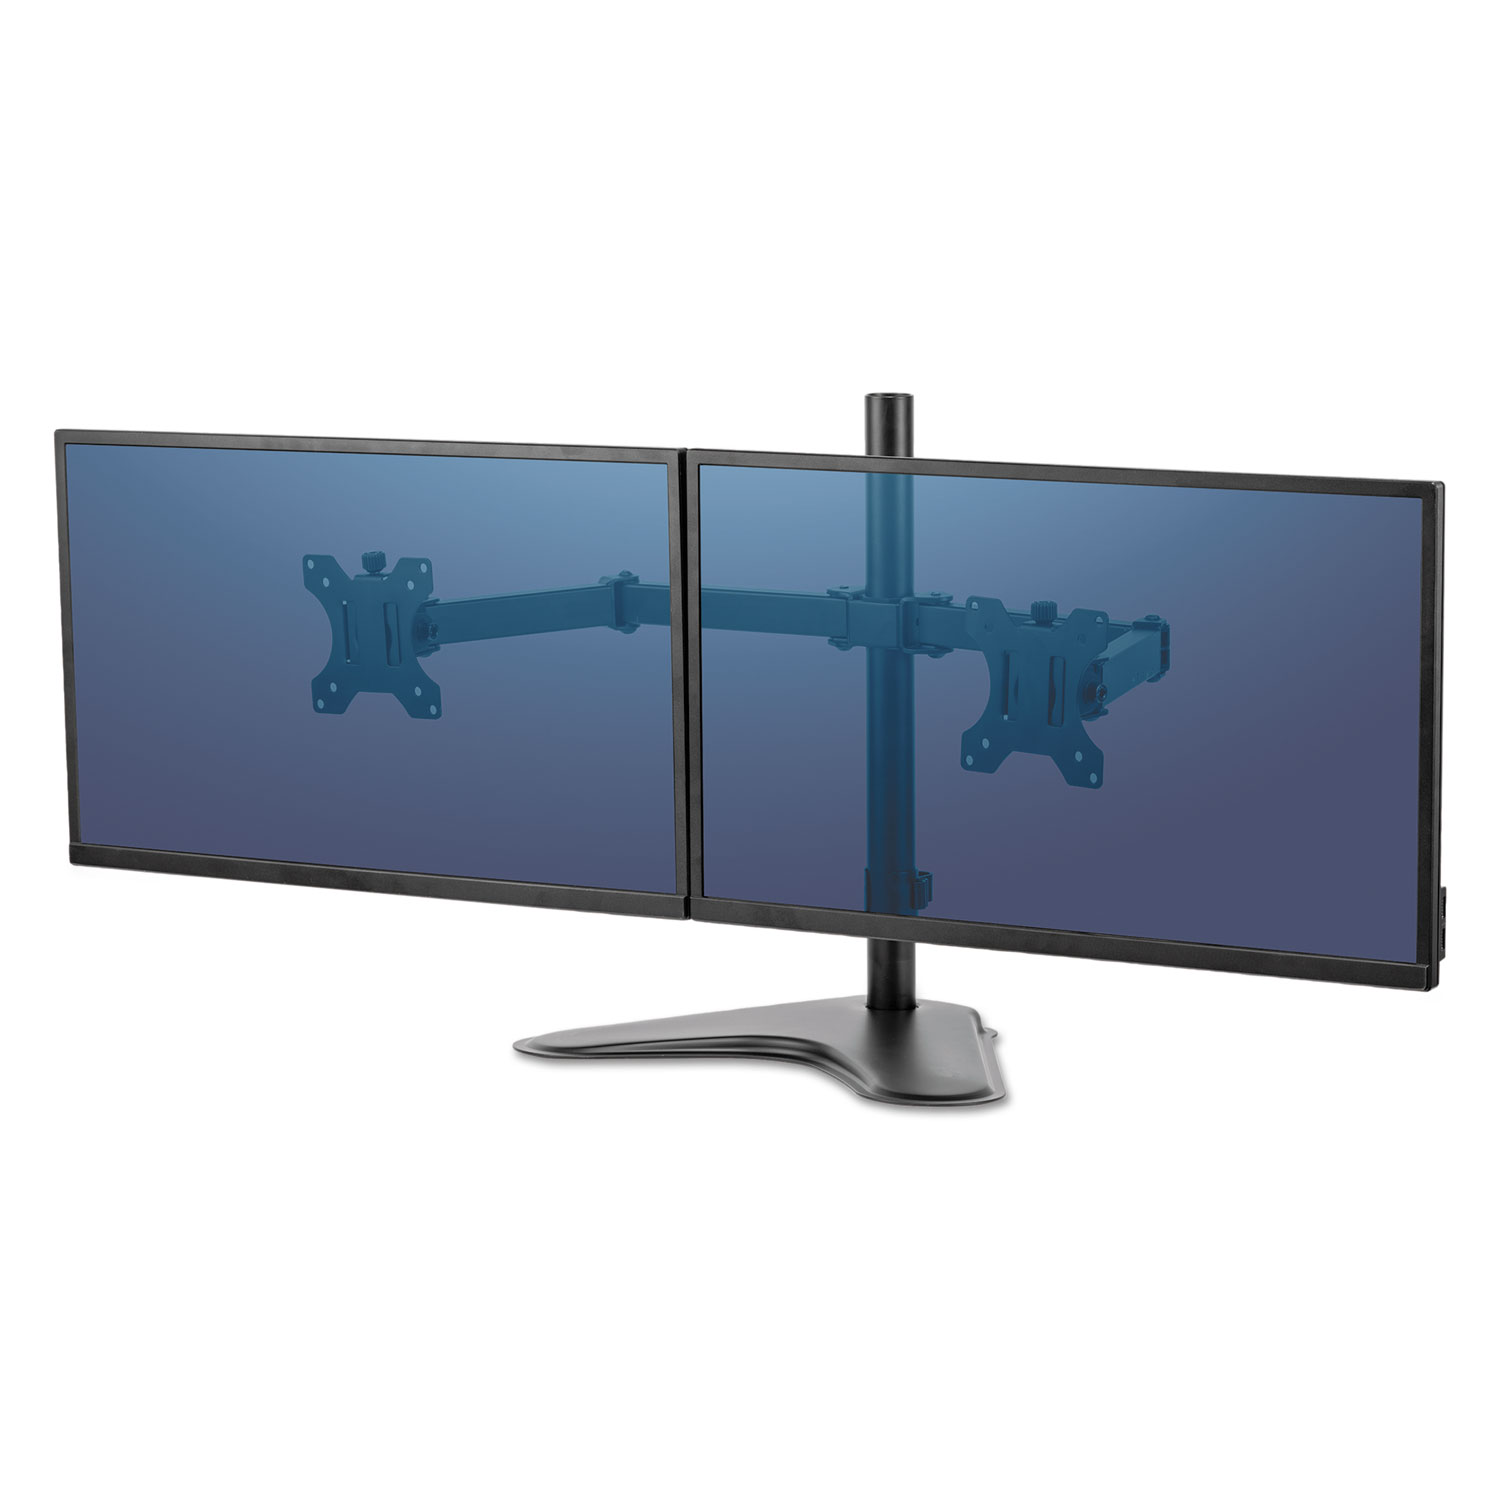 Professional Series Freestanding Dual Horizontal Monitor Arm, up to 32"/17 lbs